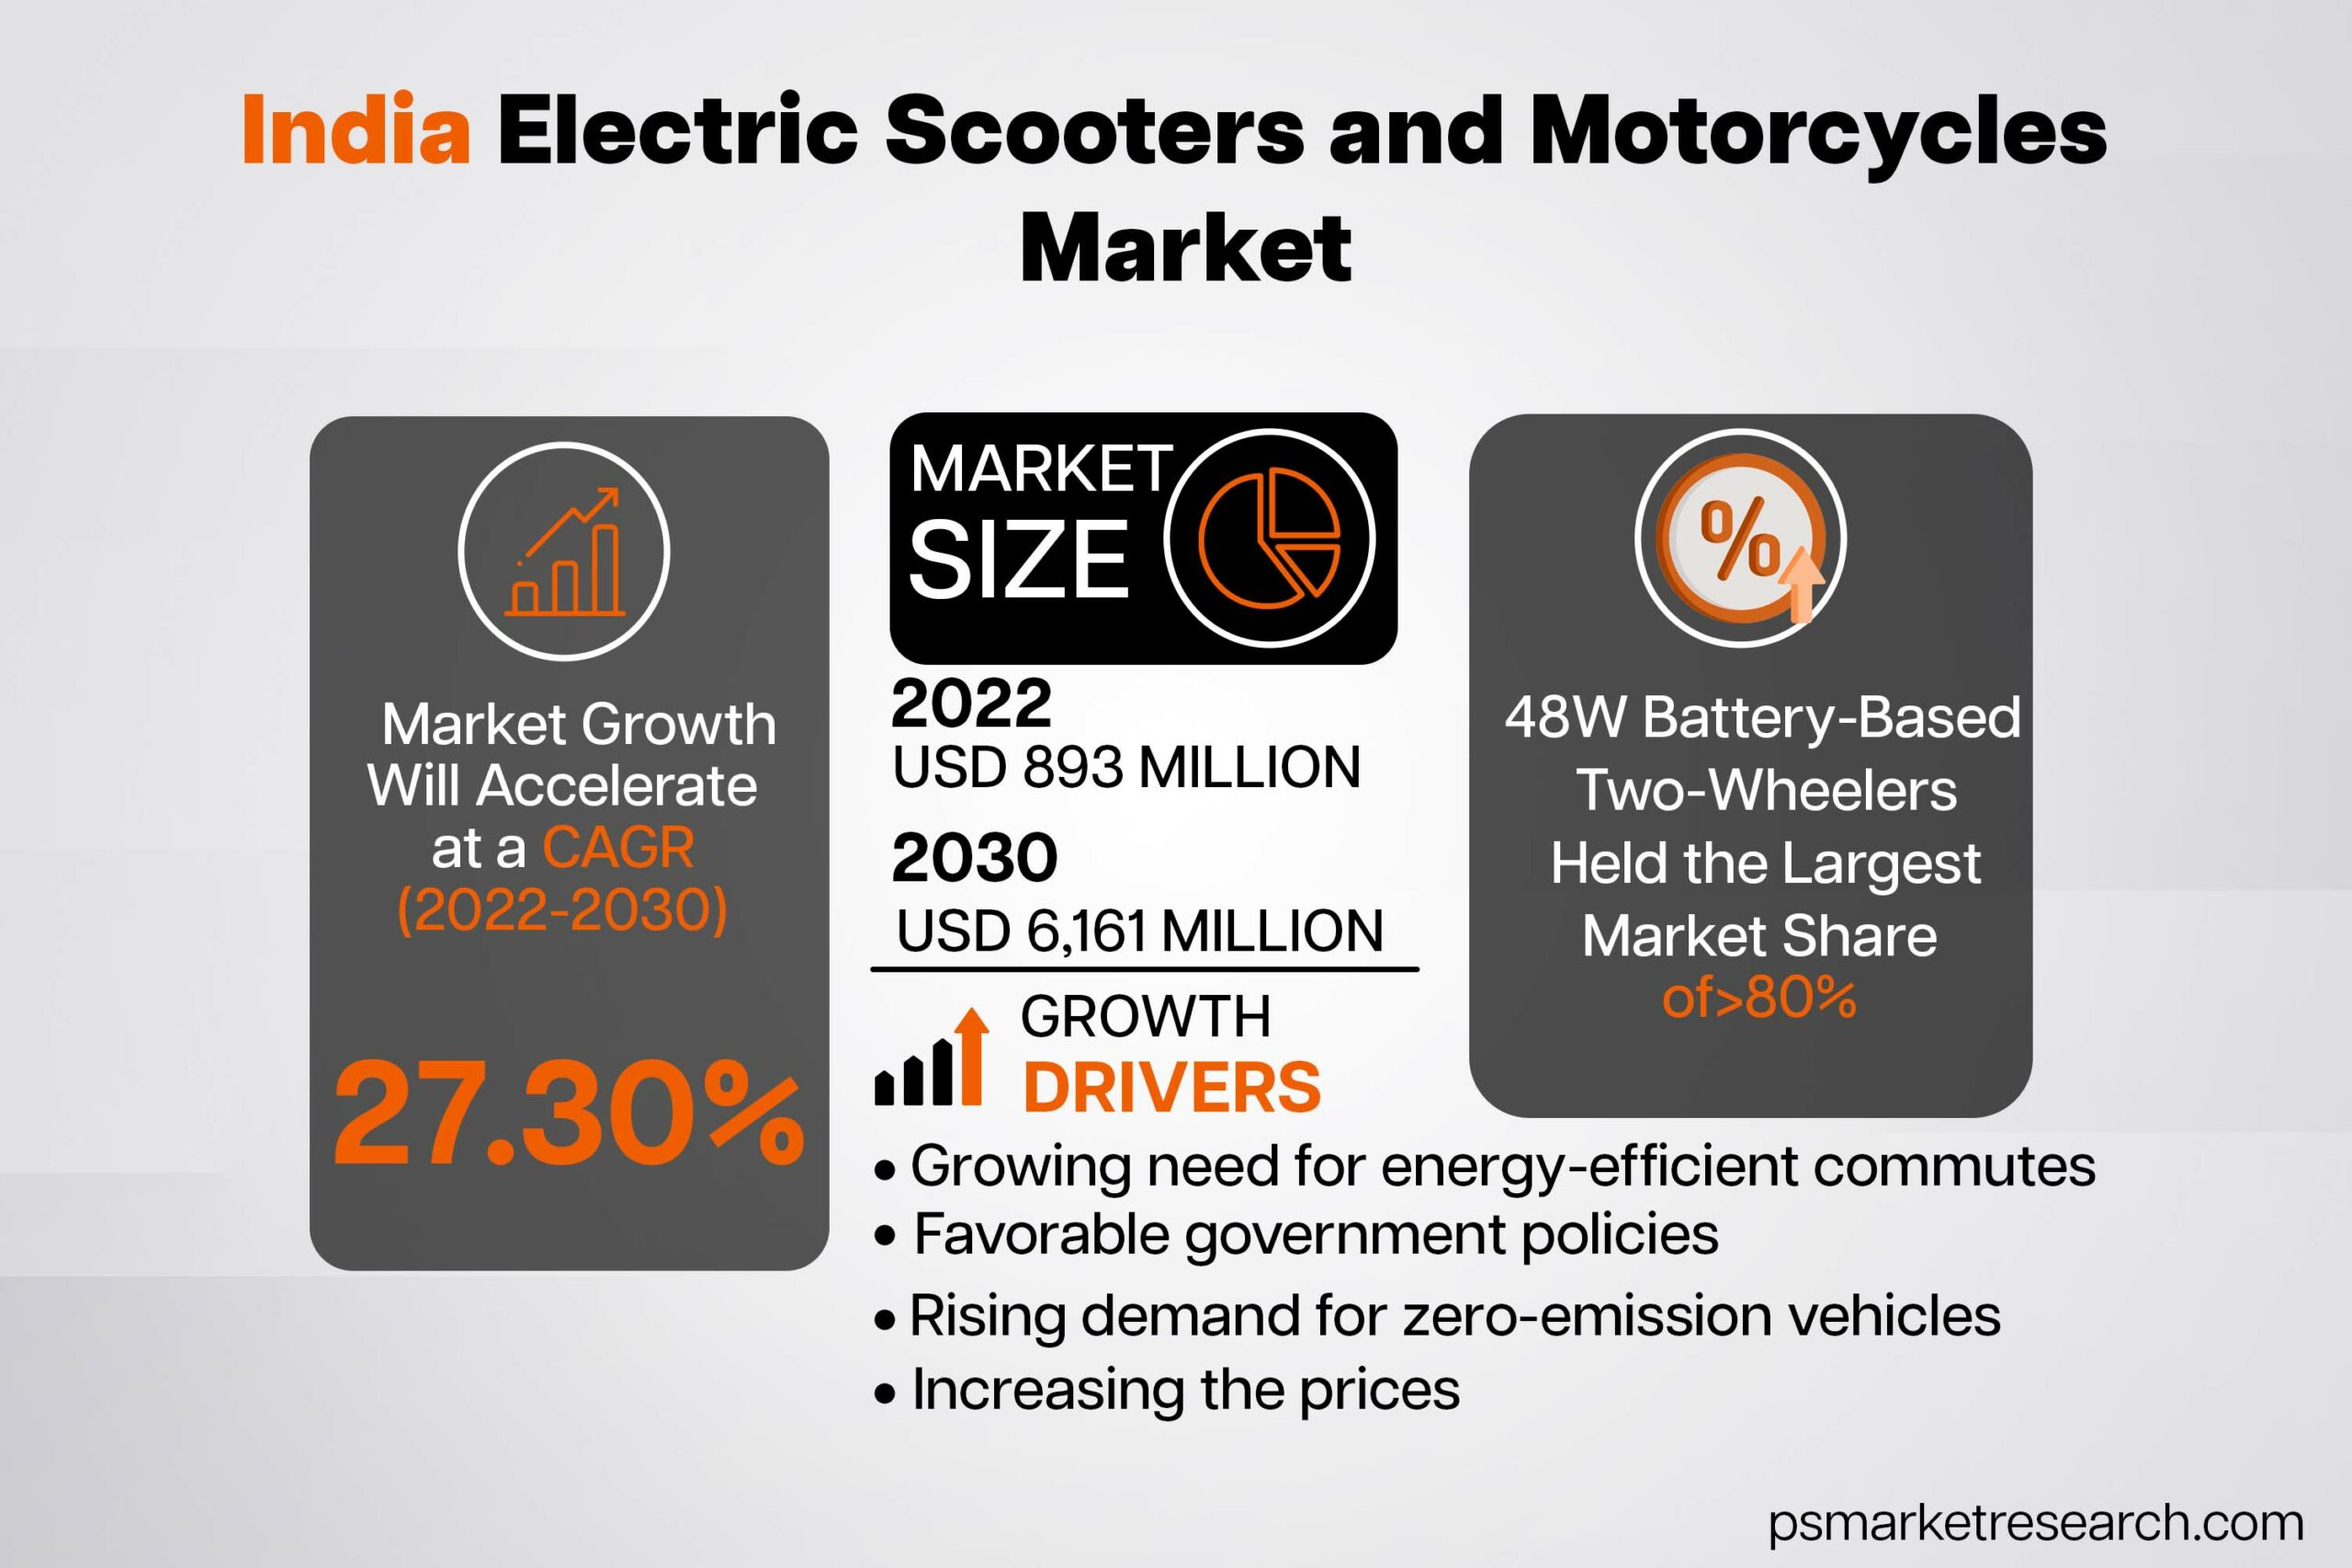 India Electric Scooters and Motorcycles Market to know